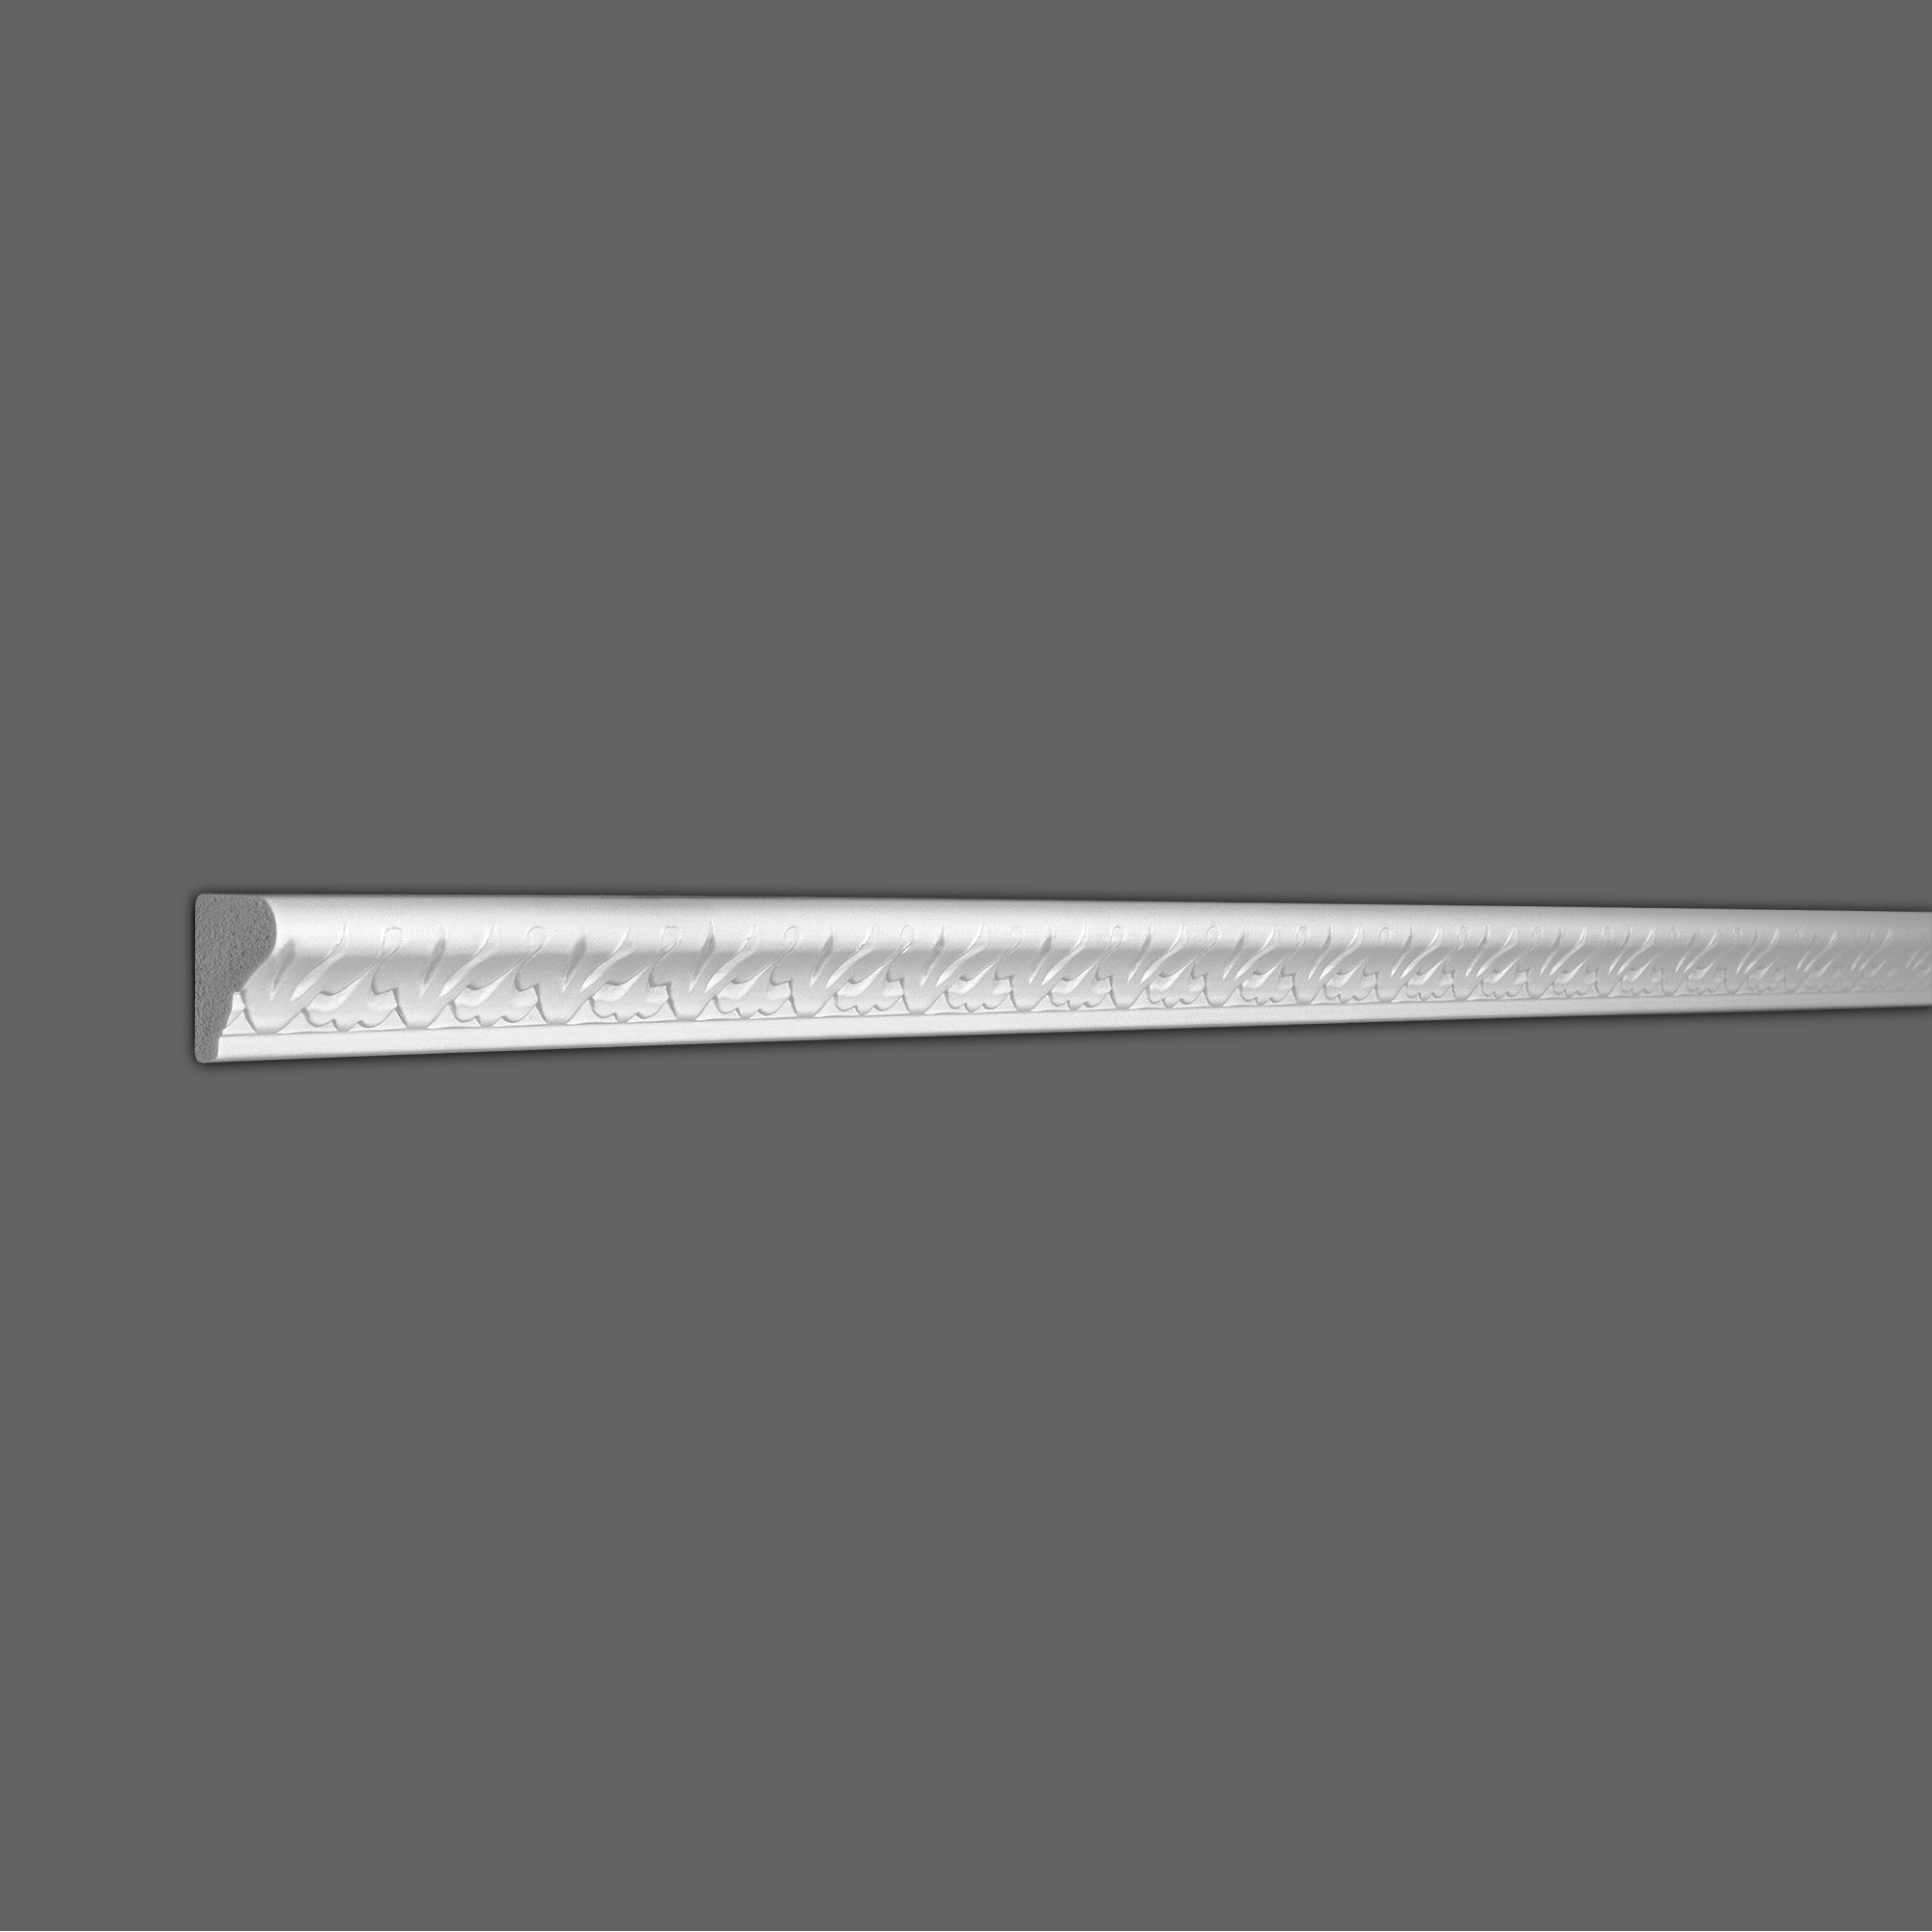 RPS-3307 H: 1-3/8" x Proj: 7/8" x L: 8' x Design Repeat: 2-1/4" Primed White Polymer Panel Moulding (11 Pack/86+Feet) - image 5 of 5